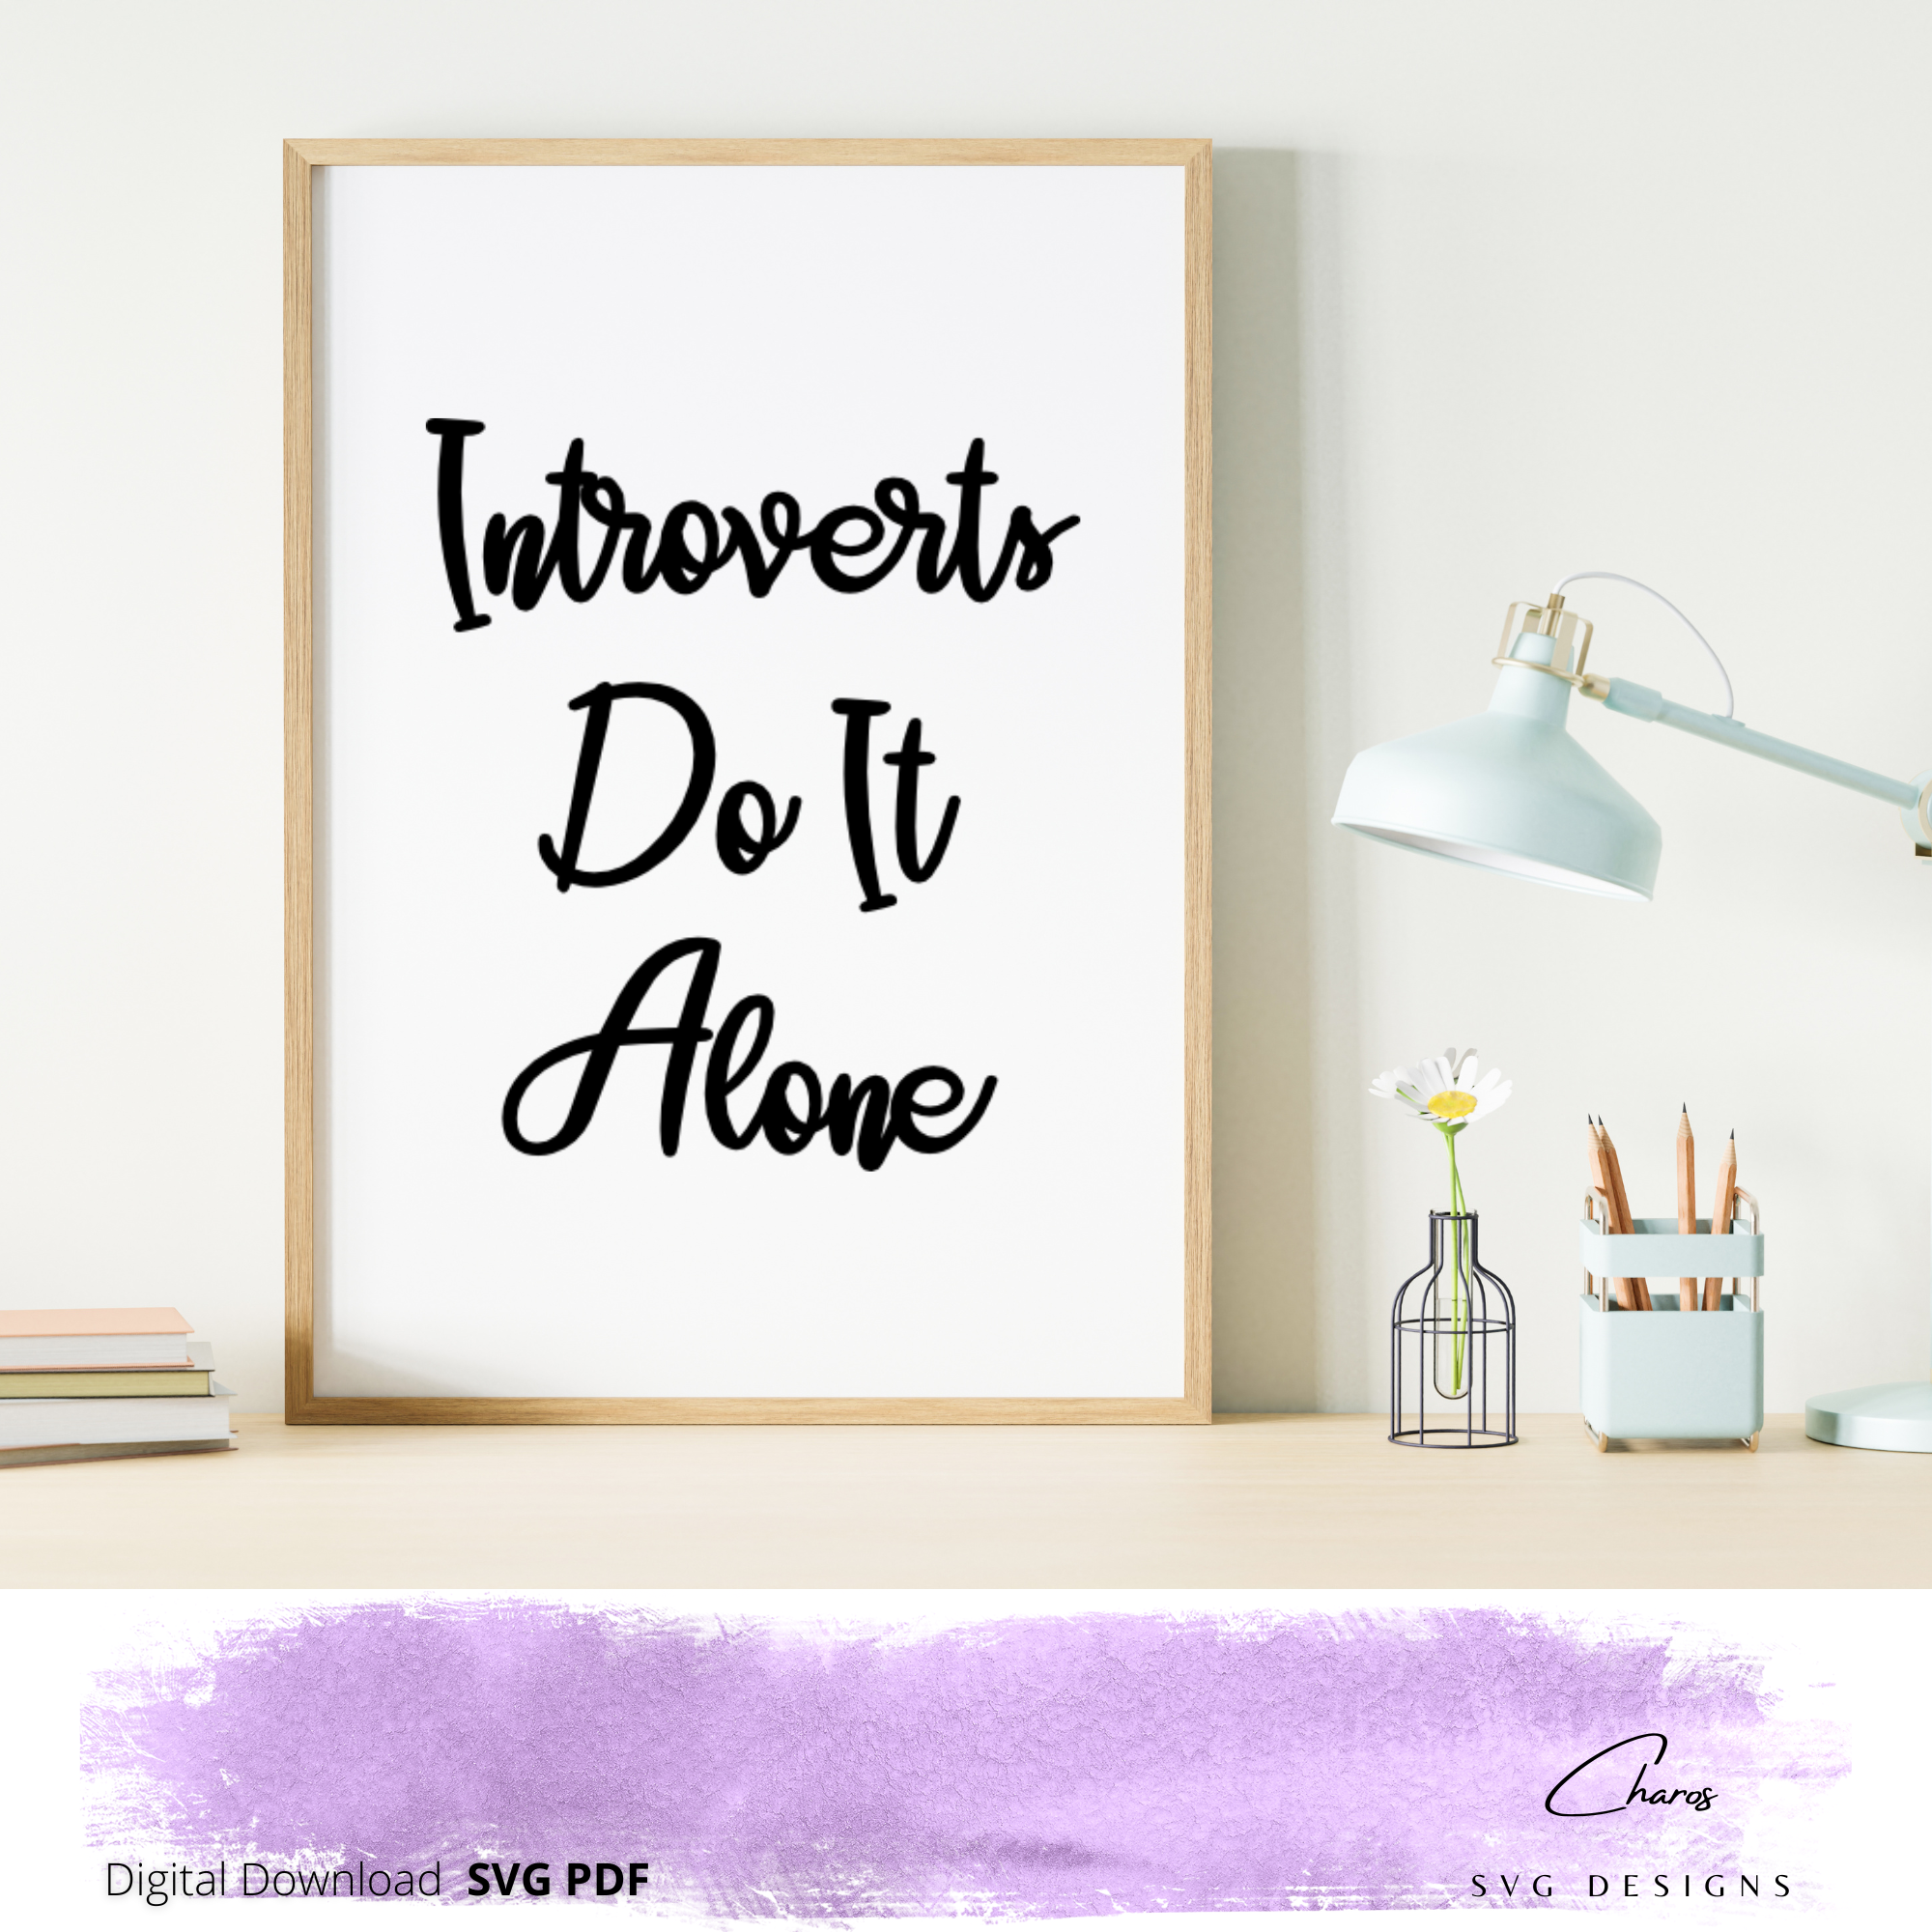 Introverts Do It Alone SVG | Witty | Thought Provoking | Personality Trait| Funny | Introvert Quote | Opposite of Extrovert | Introspective